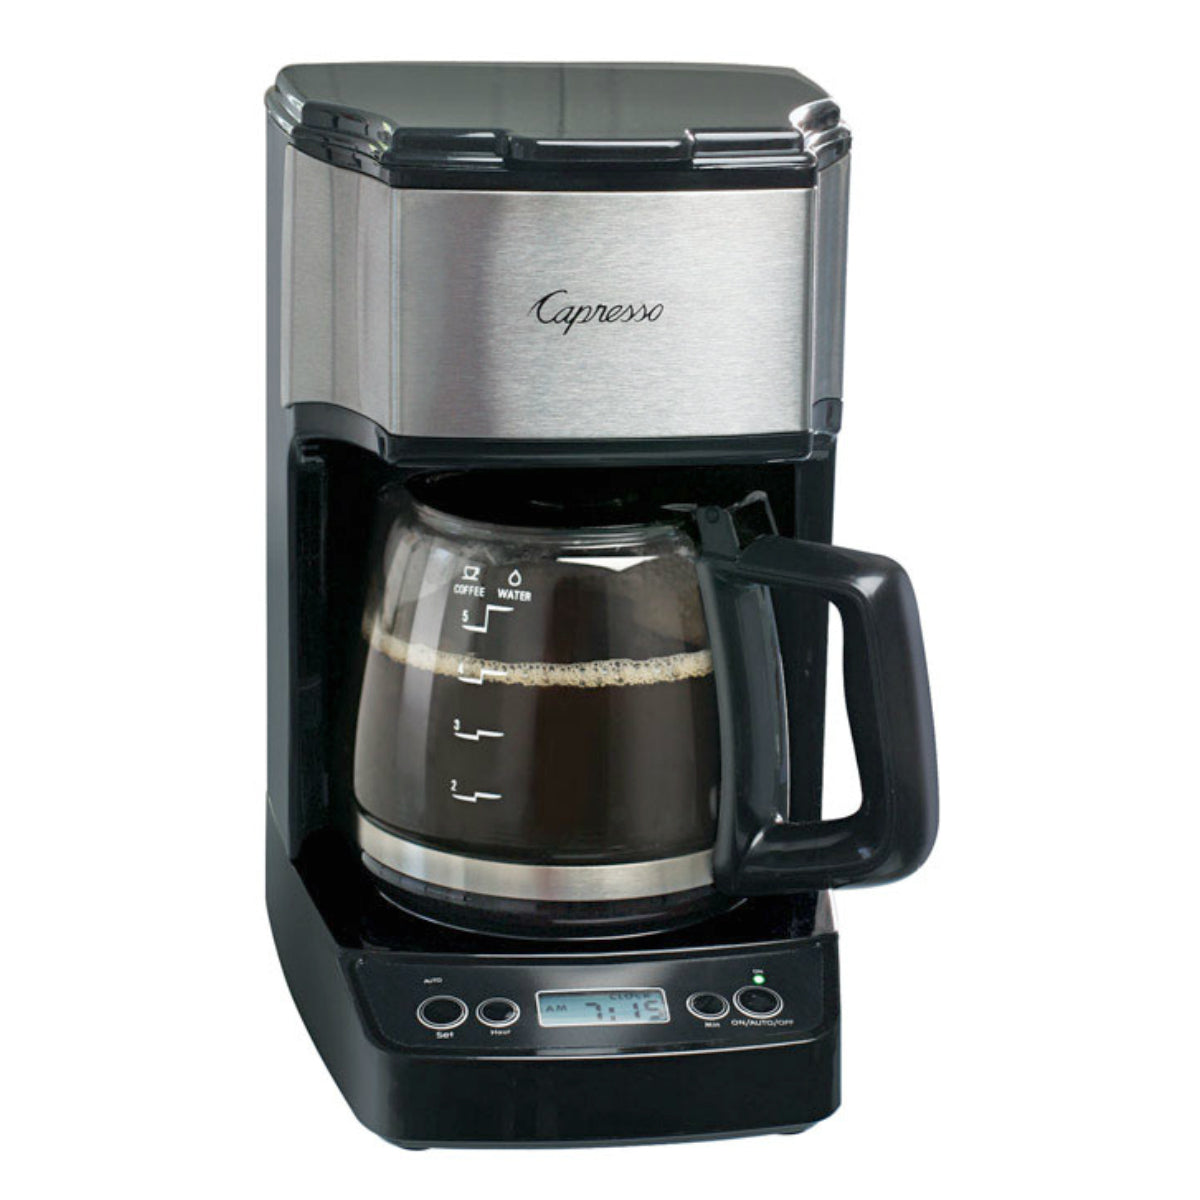 buy coffee & tea appliances at cheap rate in bulk. wholesale & retail small home appliances repair kits store.